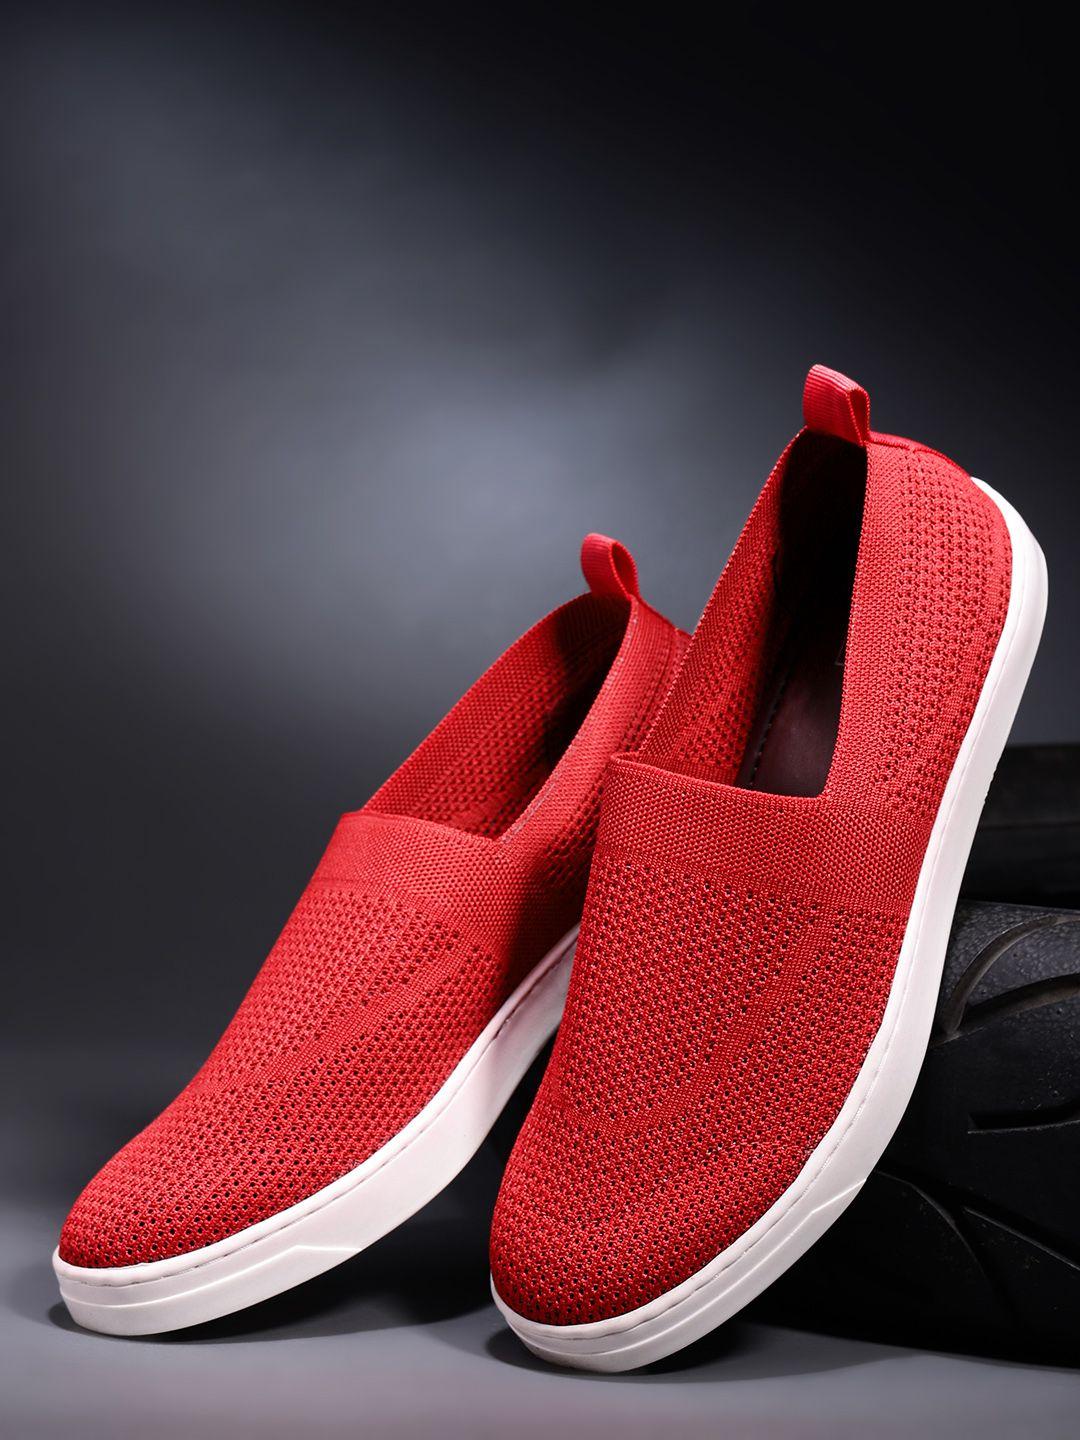 the roadster lifestyle co men red woven design slip-on sneakers